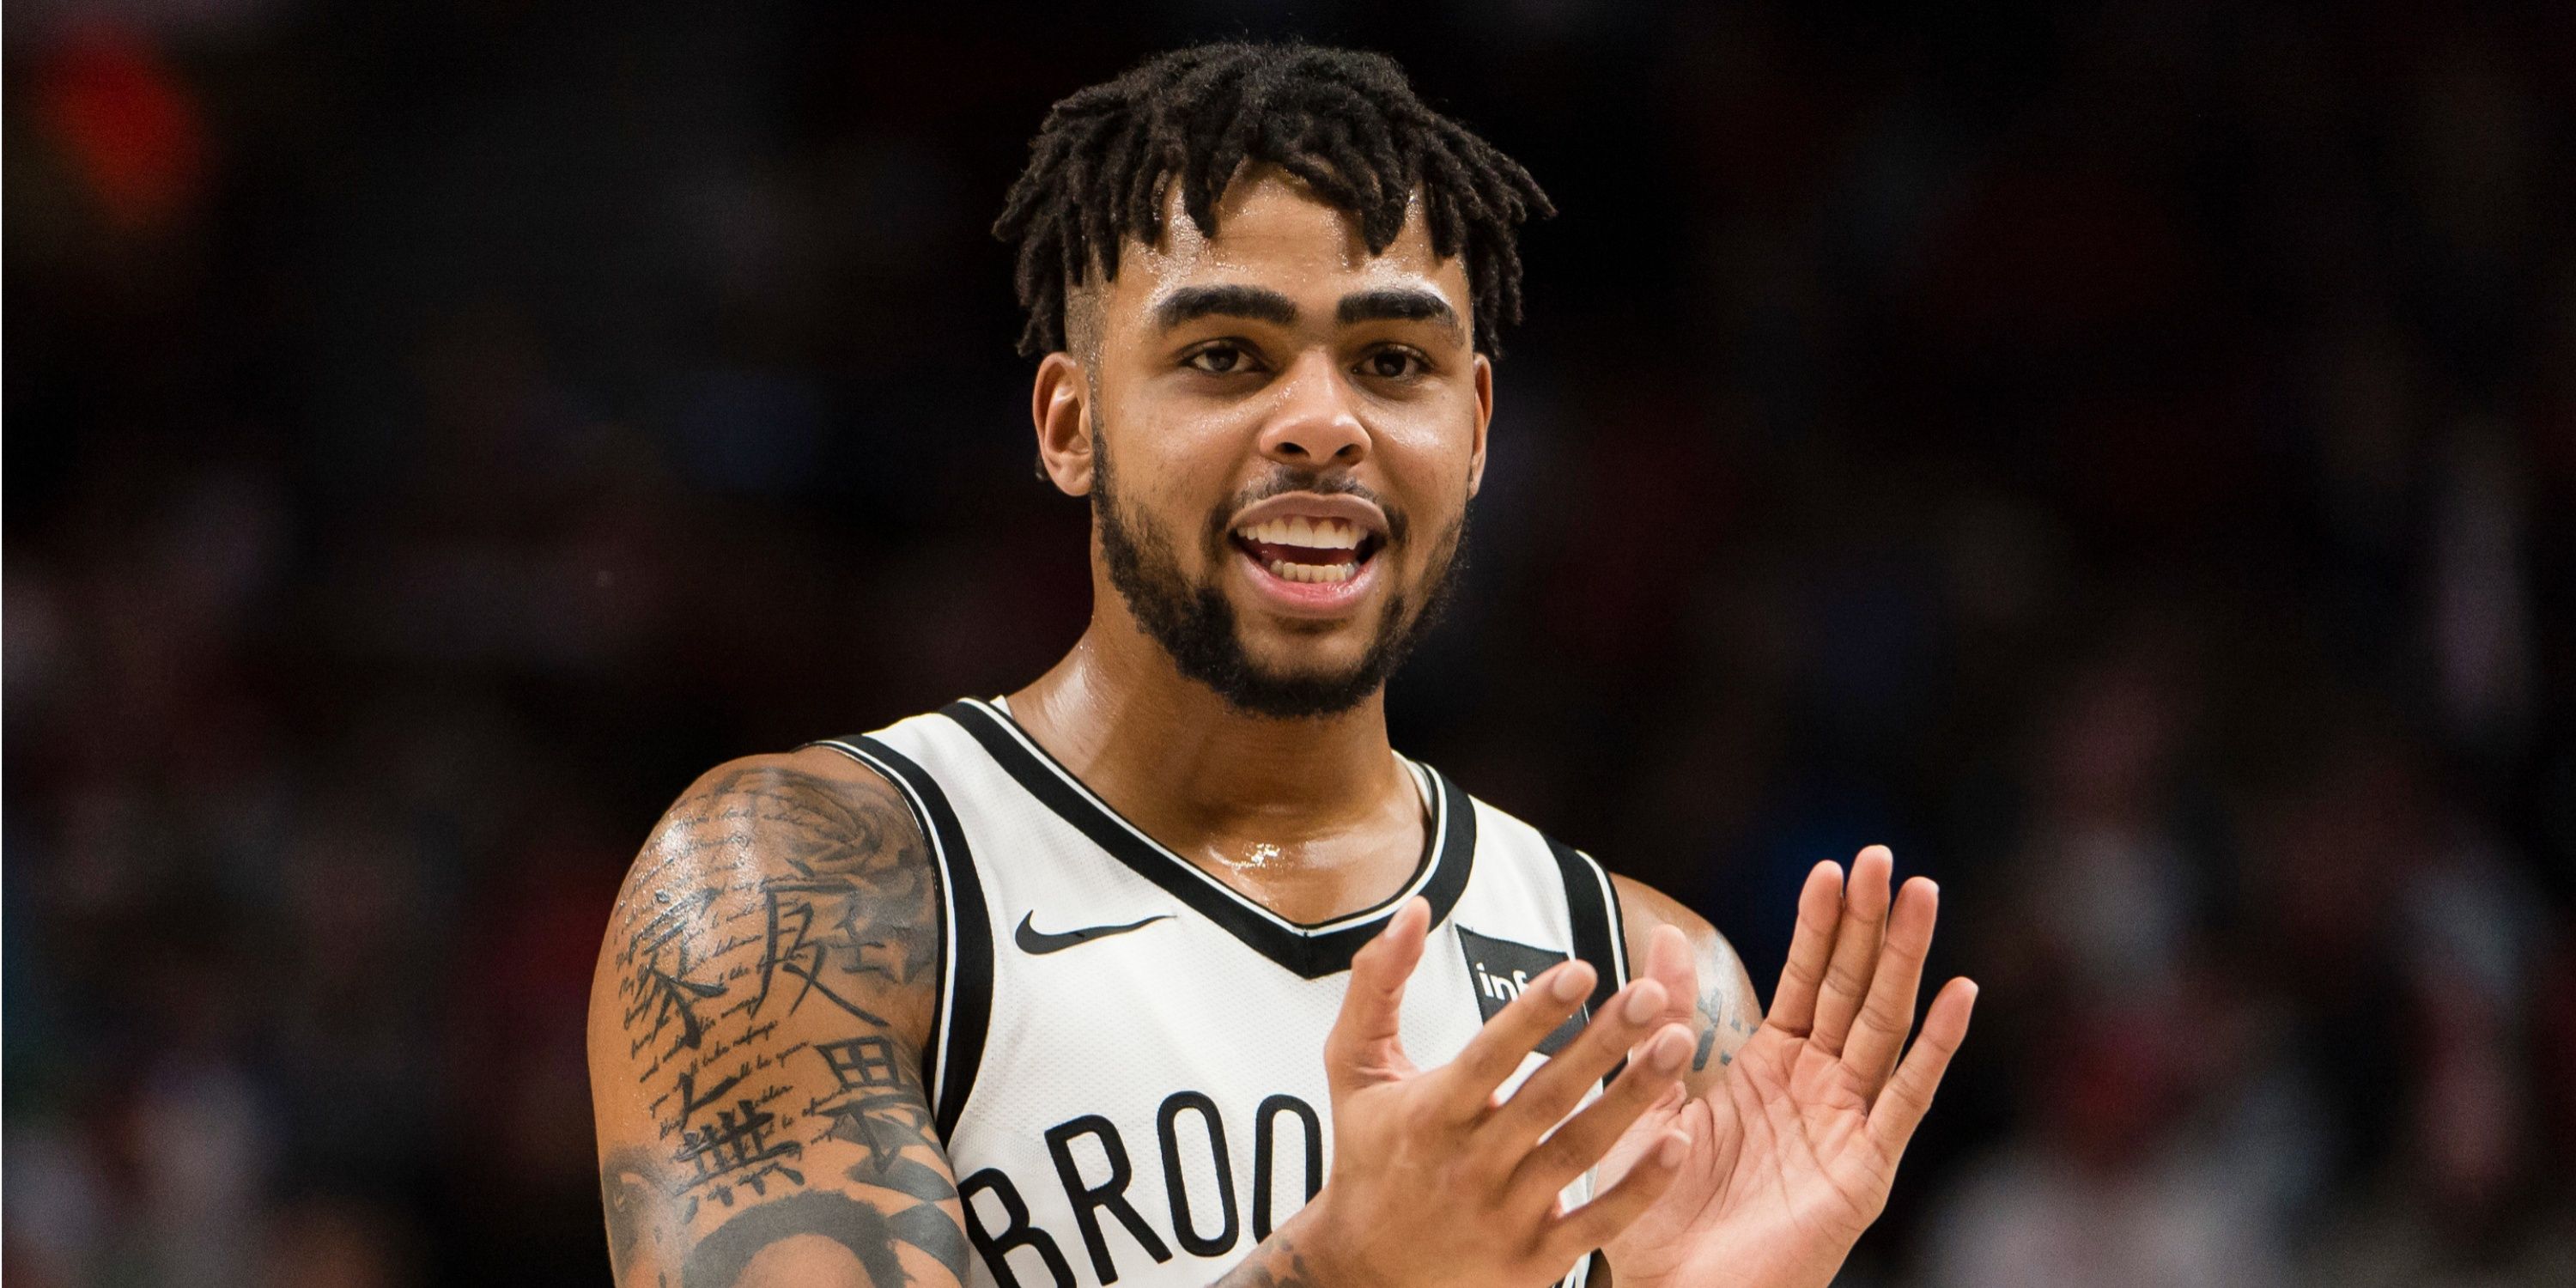 D'Angelo Russell of the Brooklyn Nets celebrates on the court